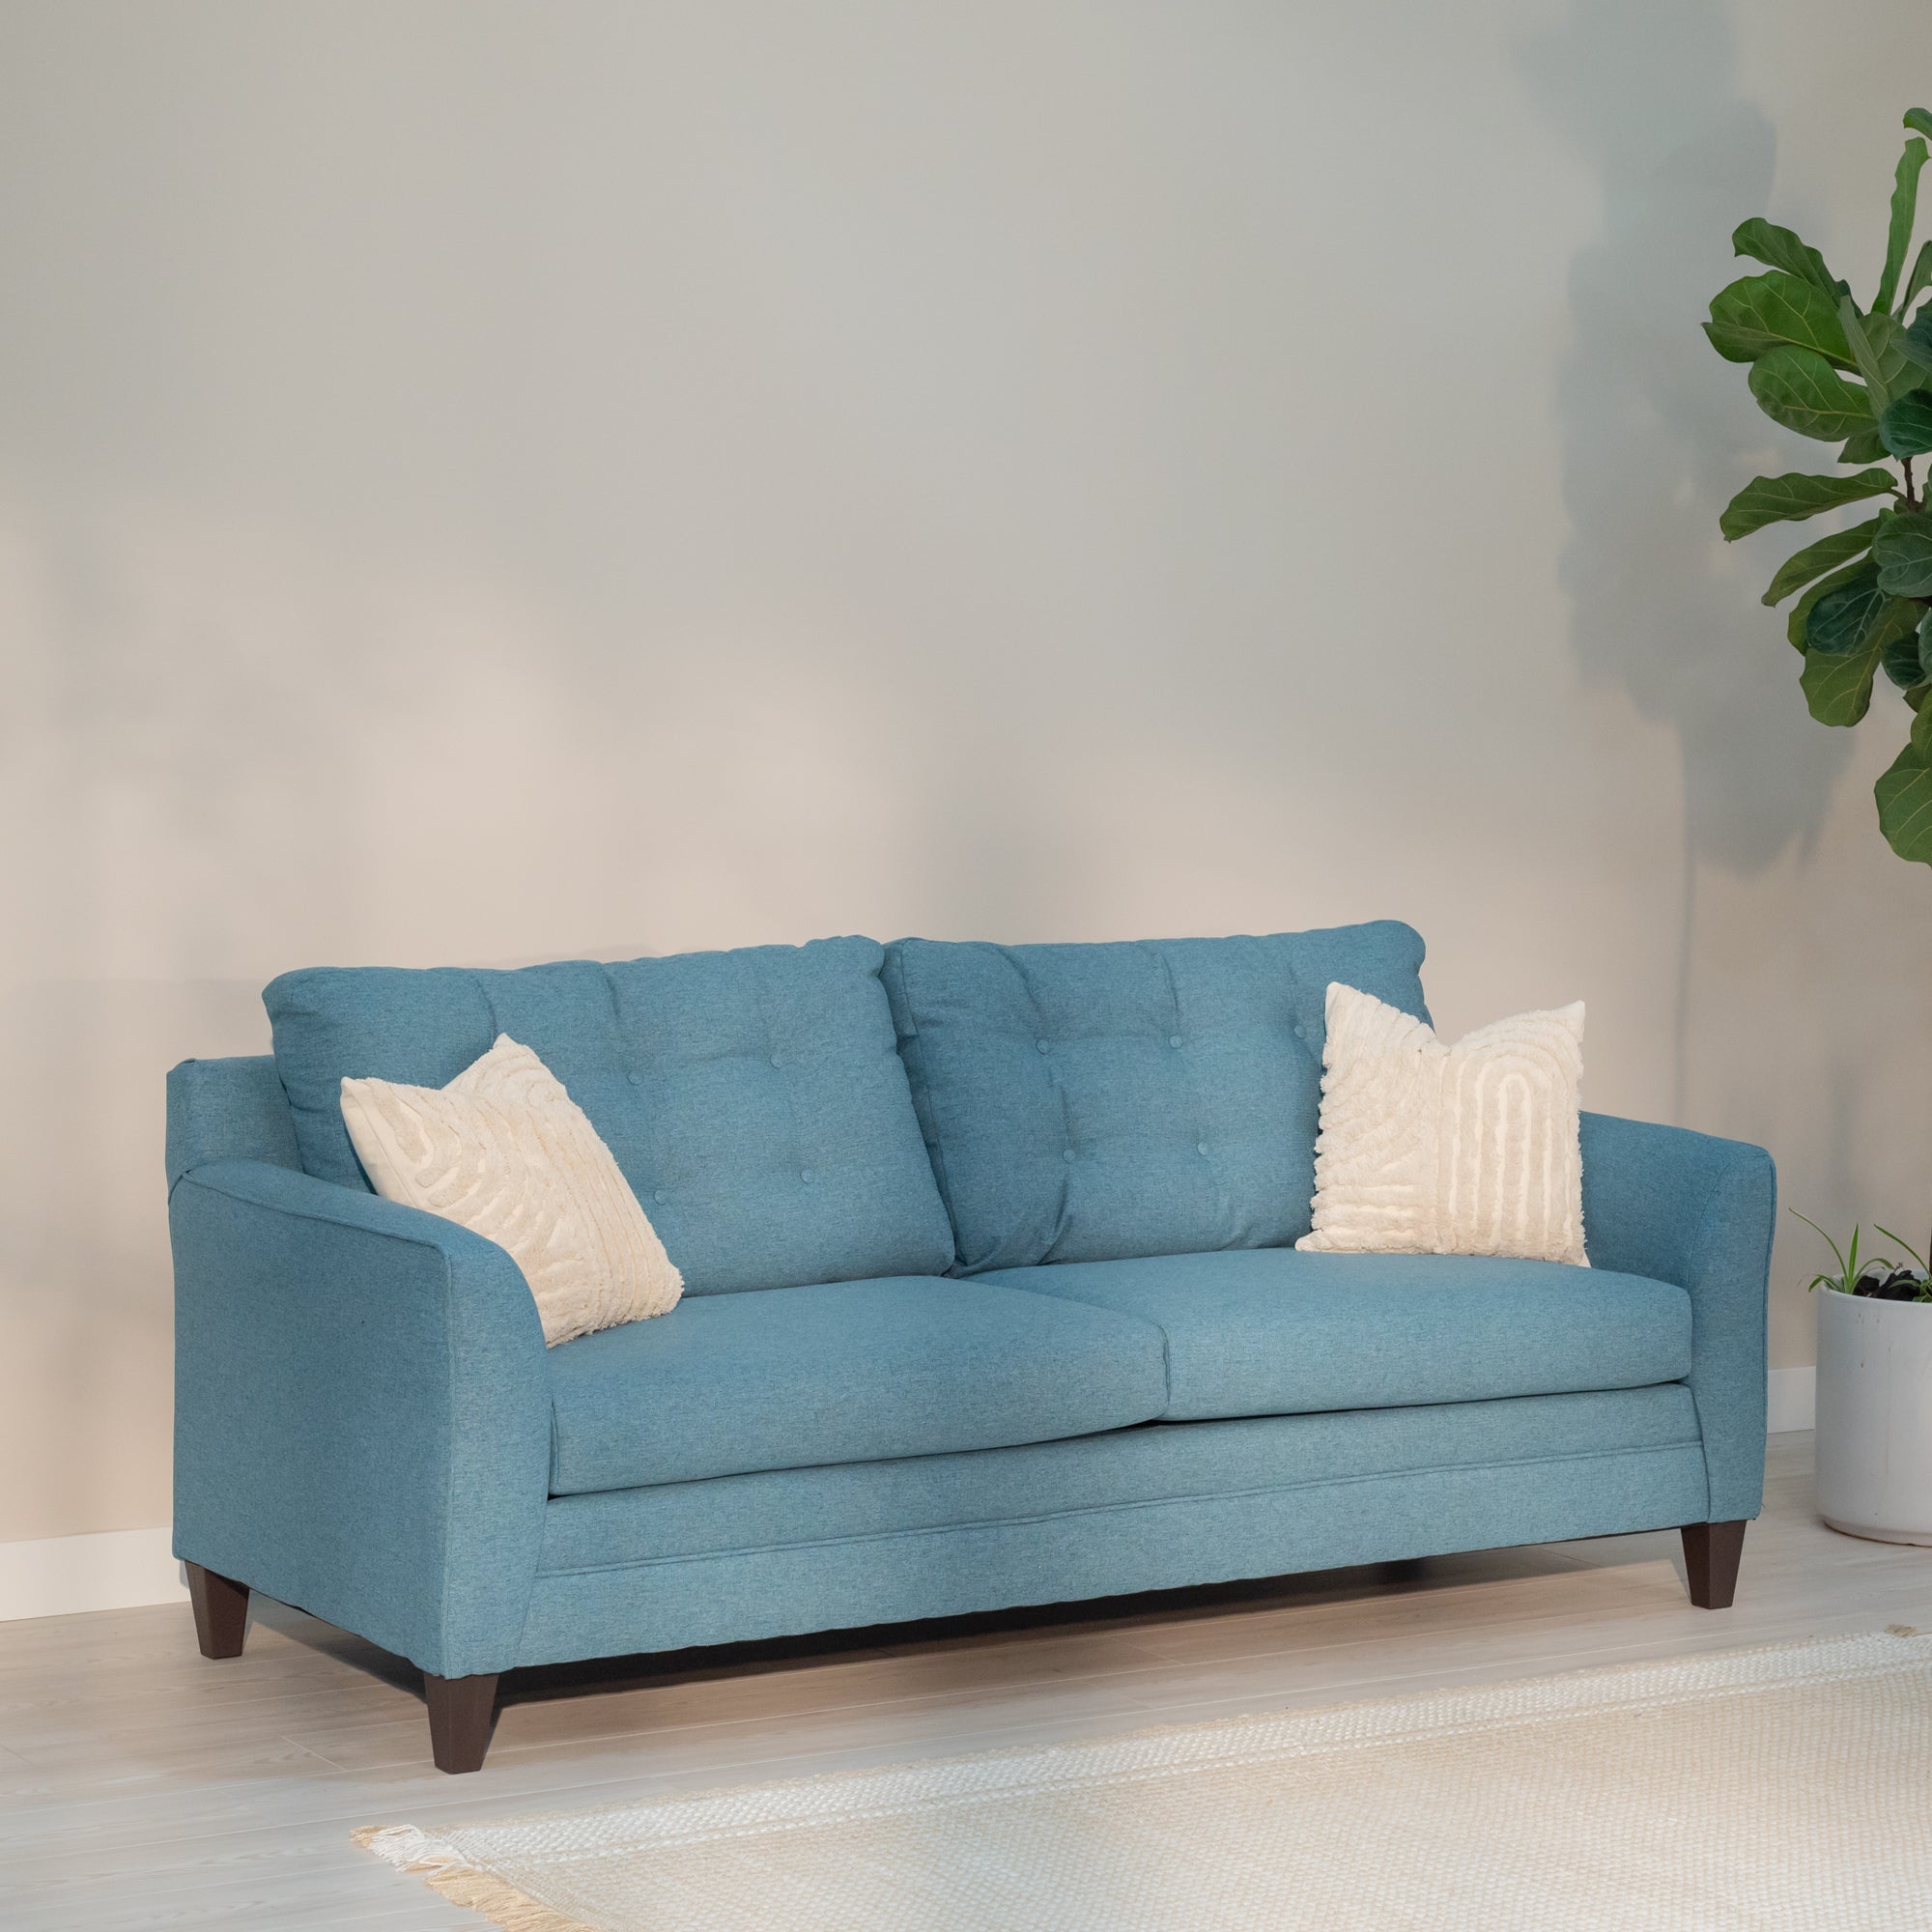 Addington Co Bayswater Sofa with Tufted Upholstery Back 81.5 inches Long, Teal Blue, 3 Seat